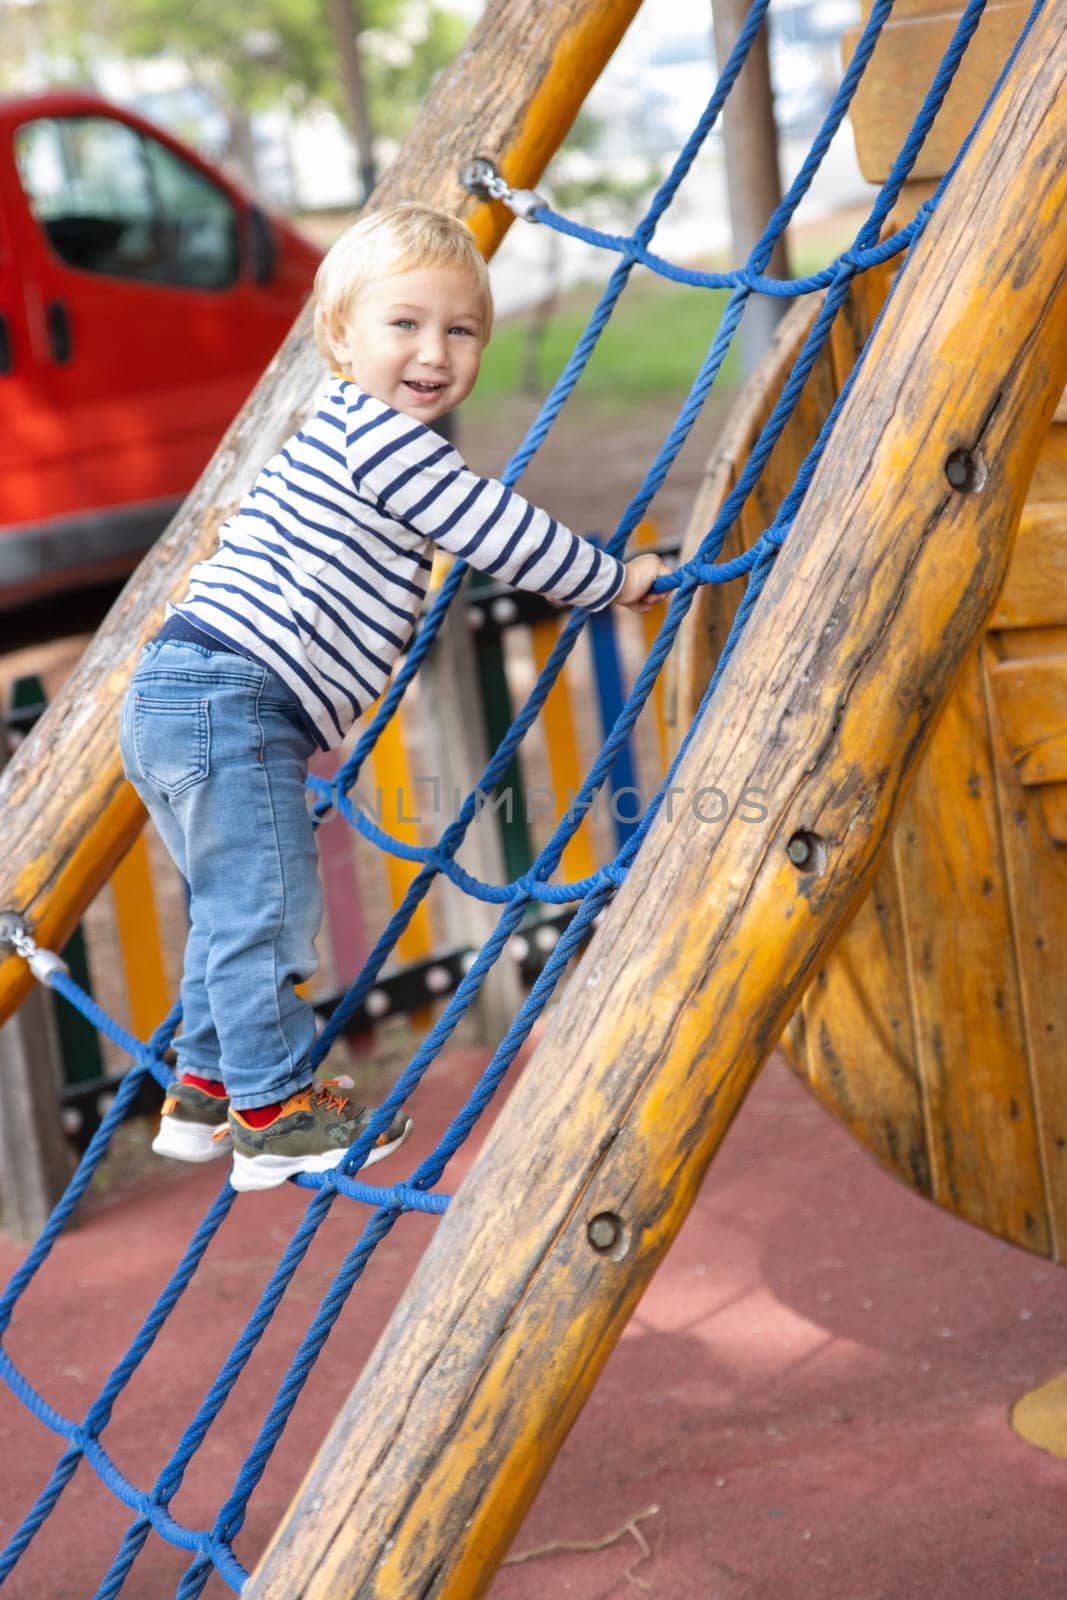 Cute little blonde boy playing on the playground - looking in the camera by Studia72